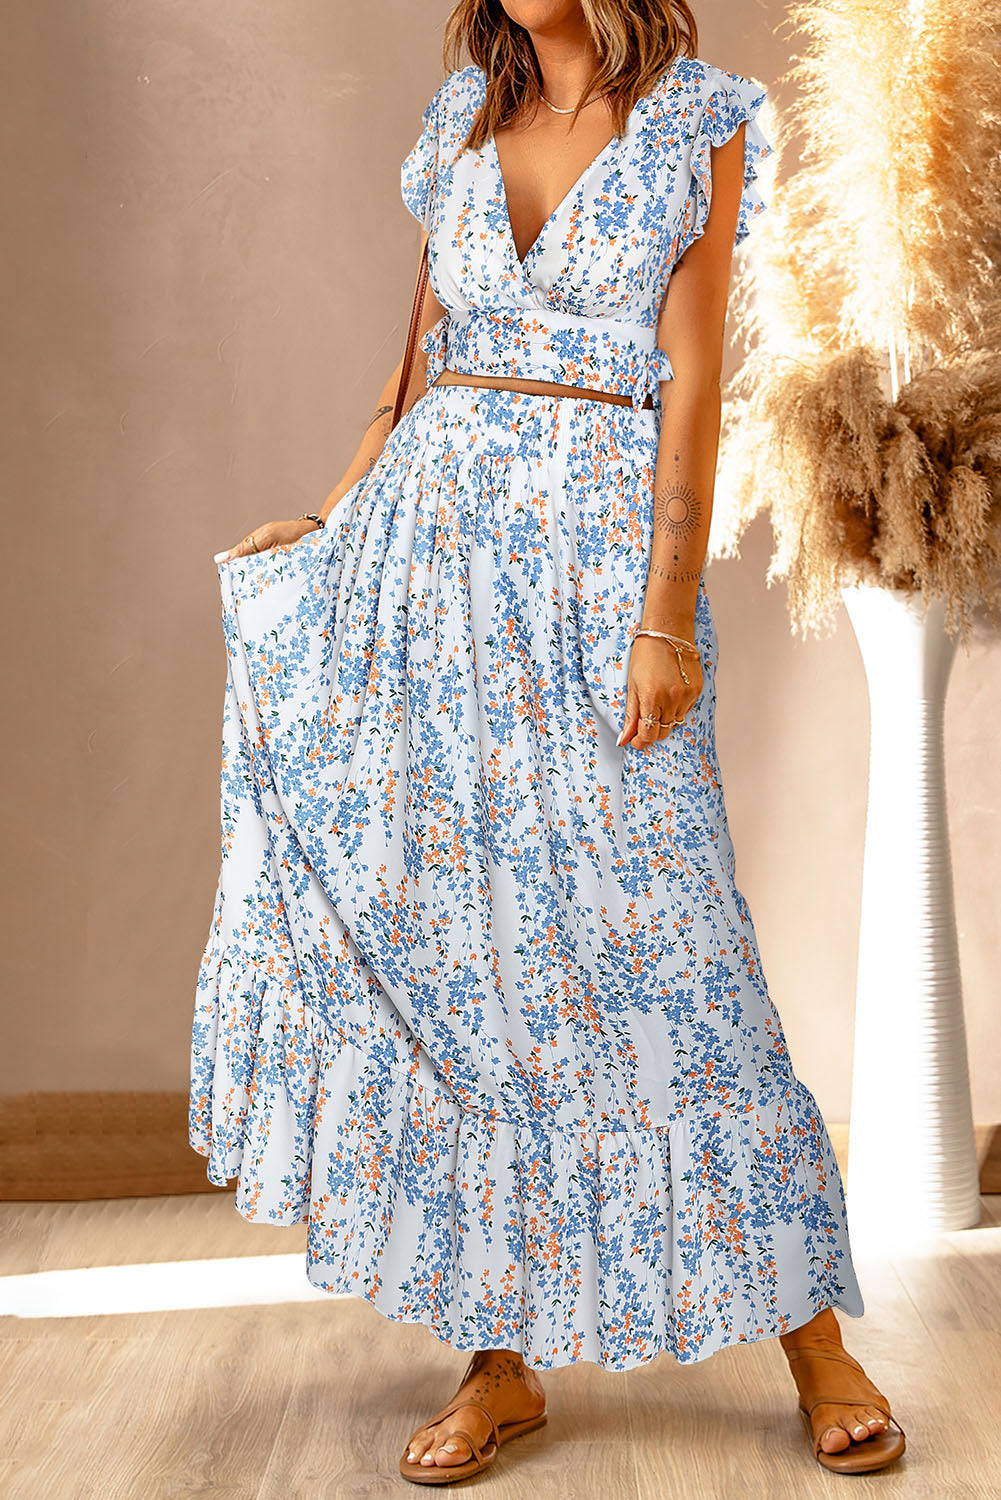 White Floral Ruffled Crop Top and Maxi Skirt Set with a 30% Discount the Price is $126.64 ($37.99 Savings)